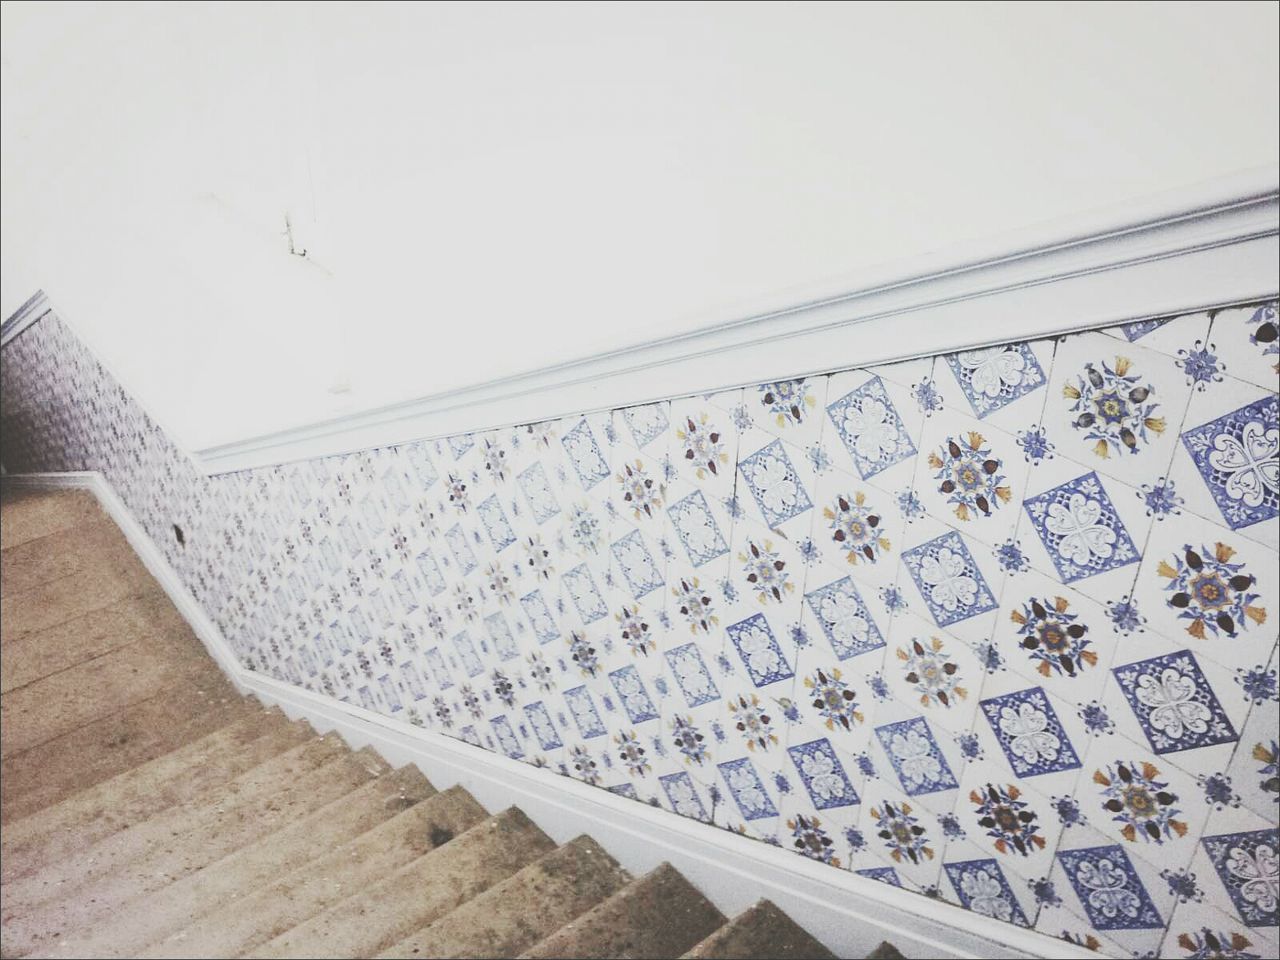 Tiled wall by stairway